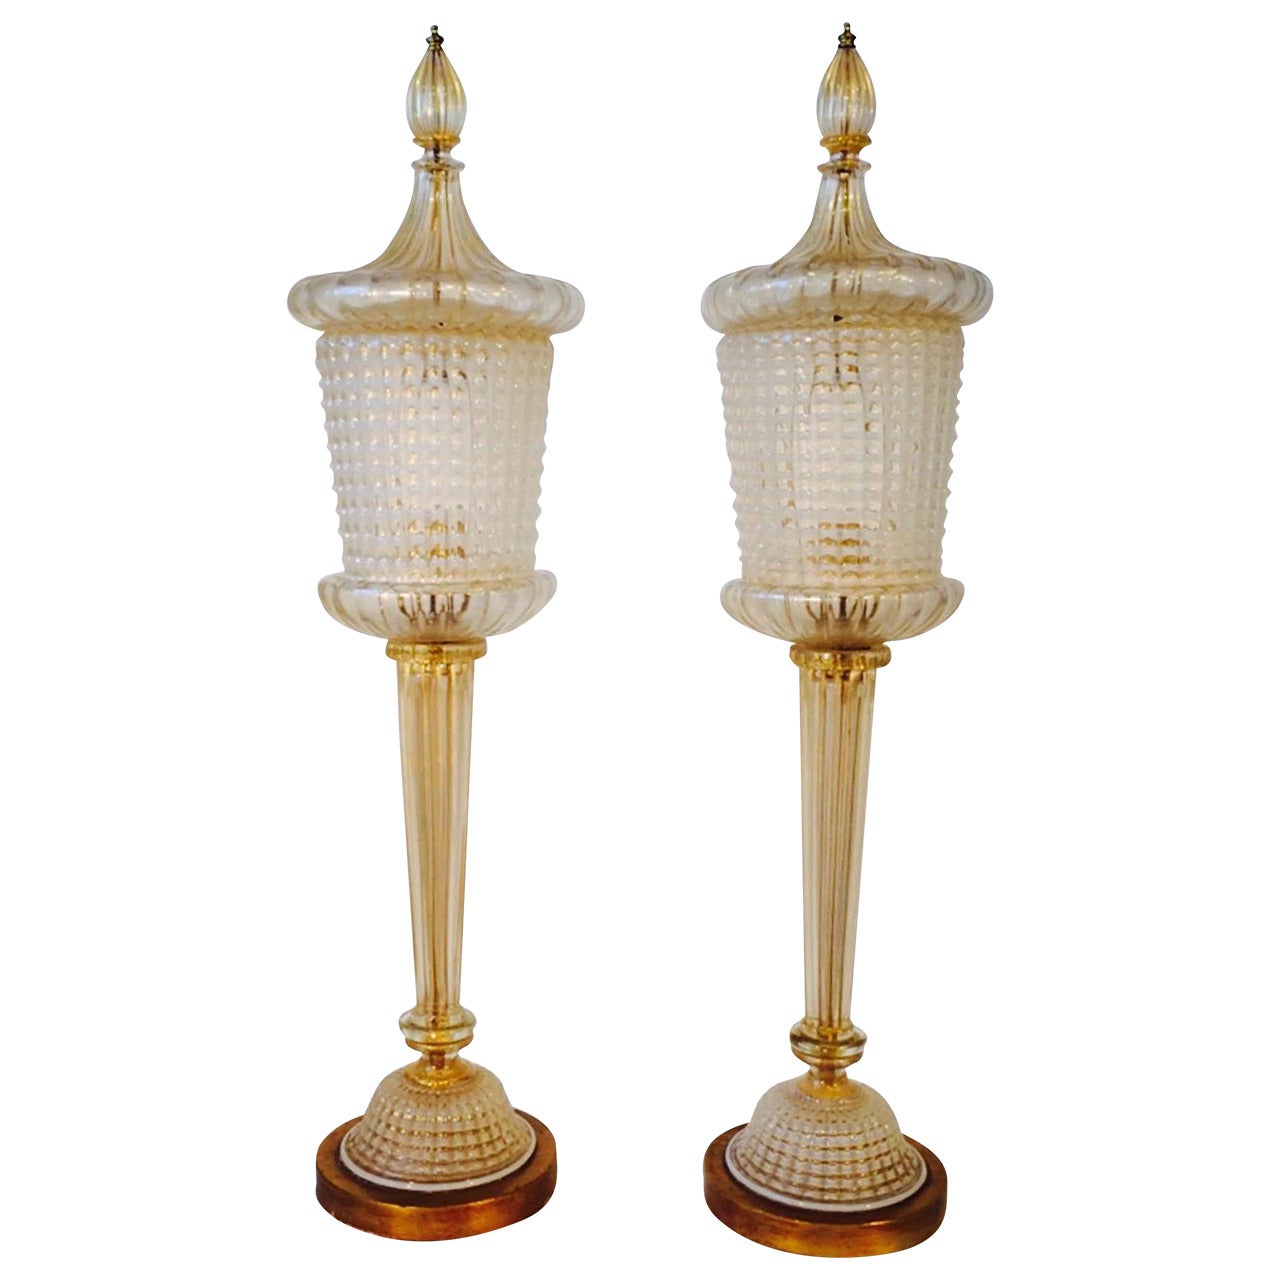 Pair of Barovier e Toso Murano Glass Lantern Table Lamps